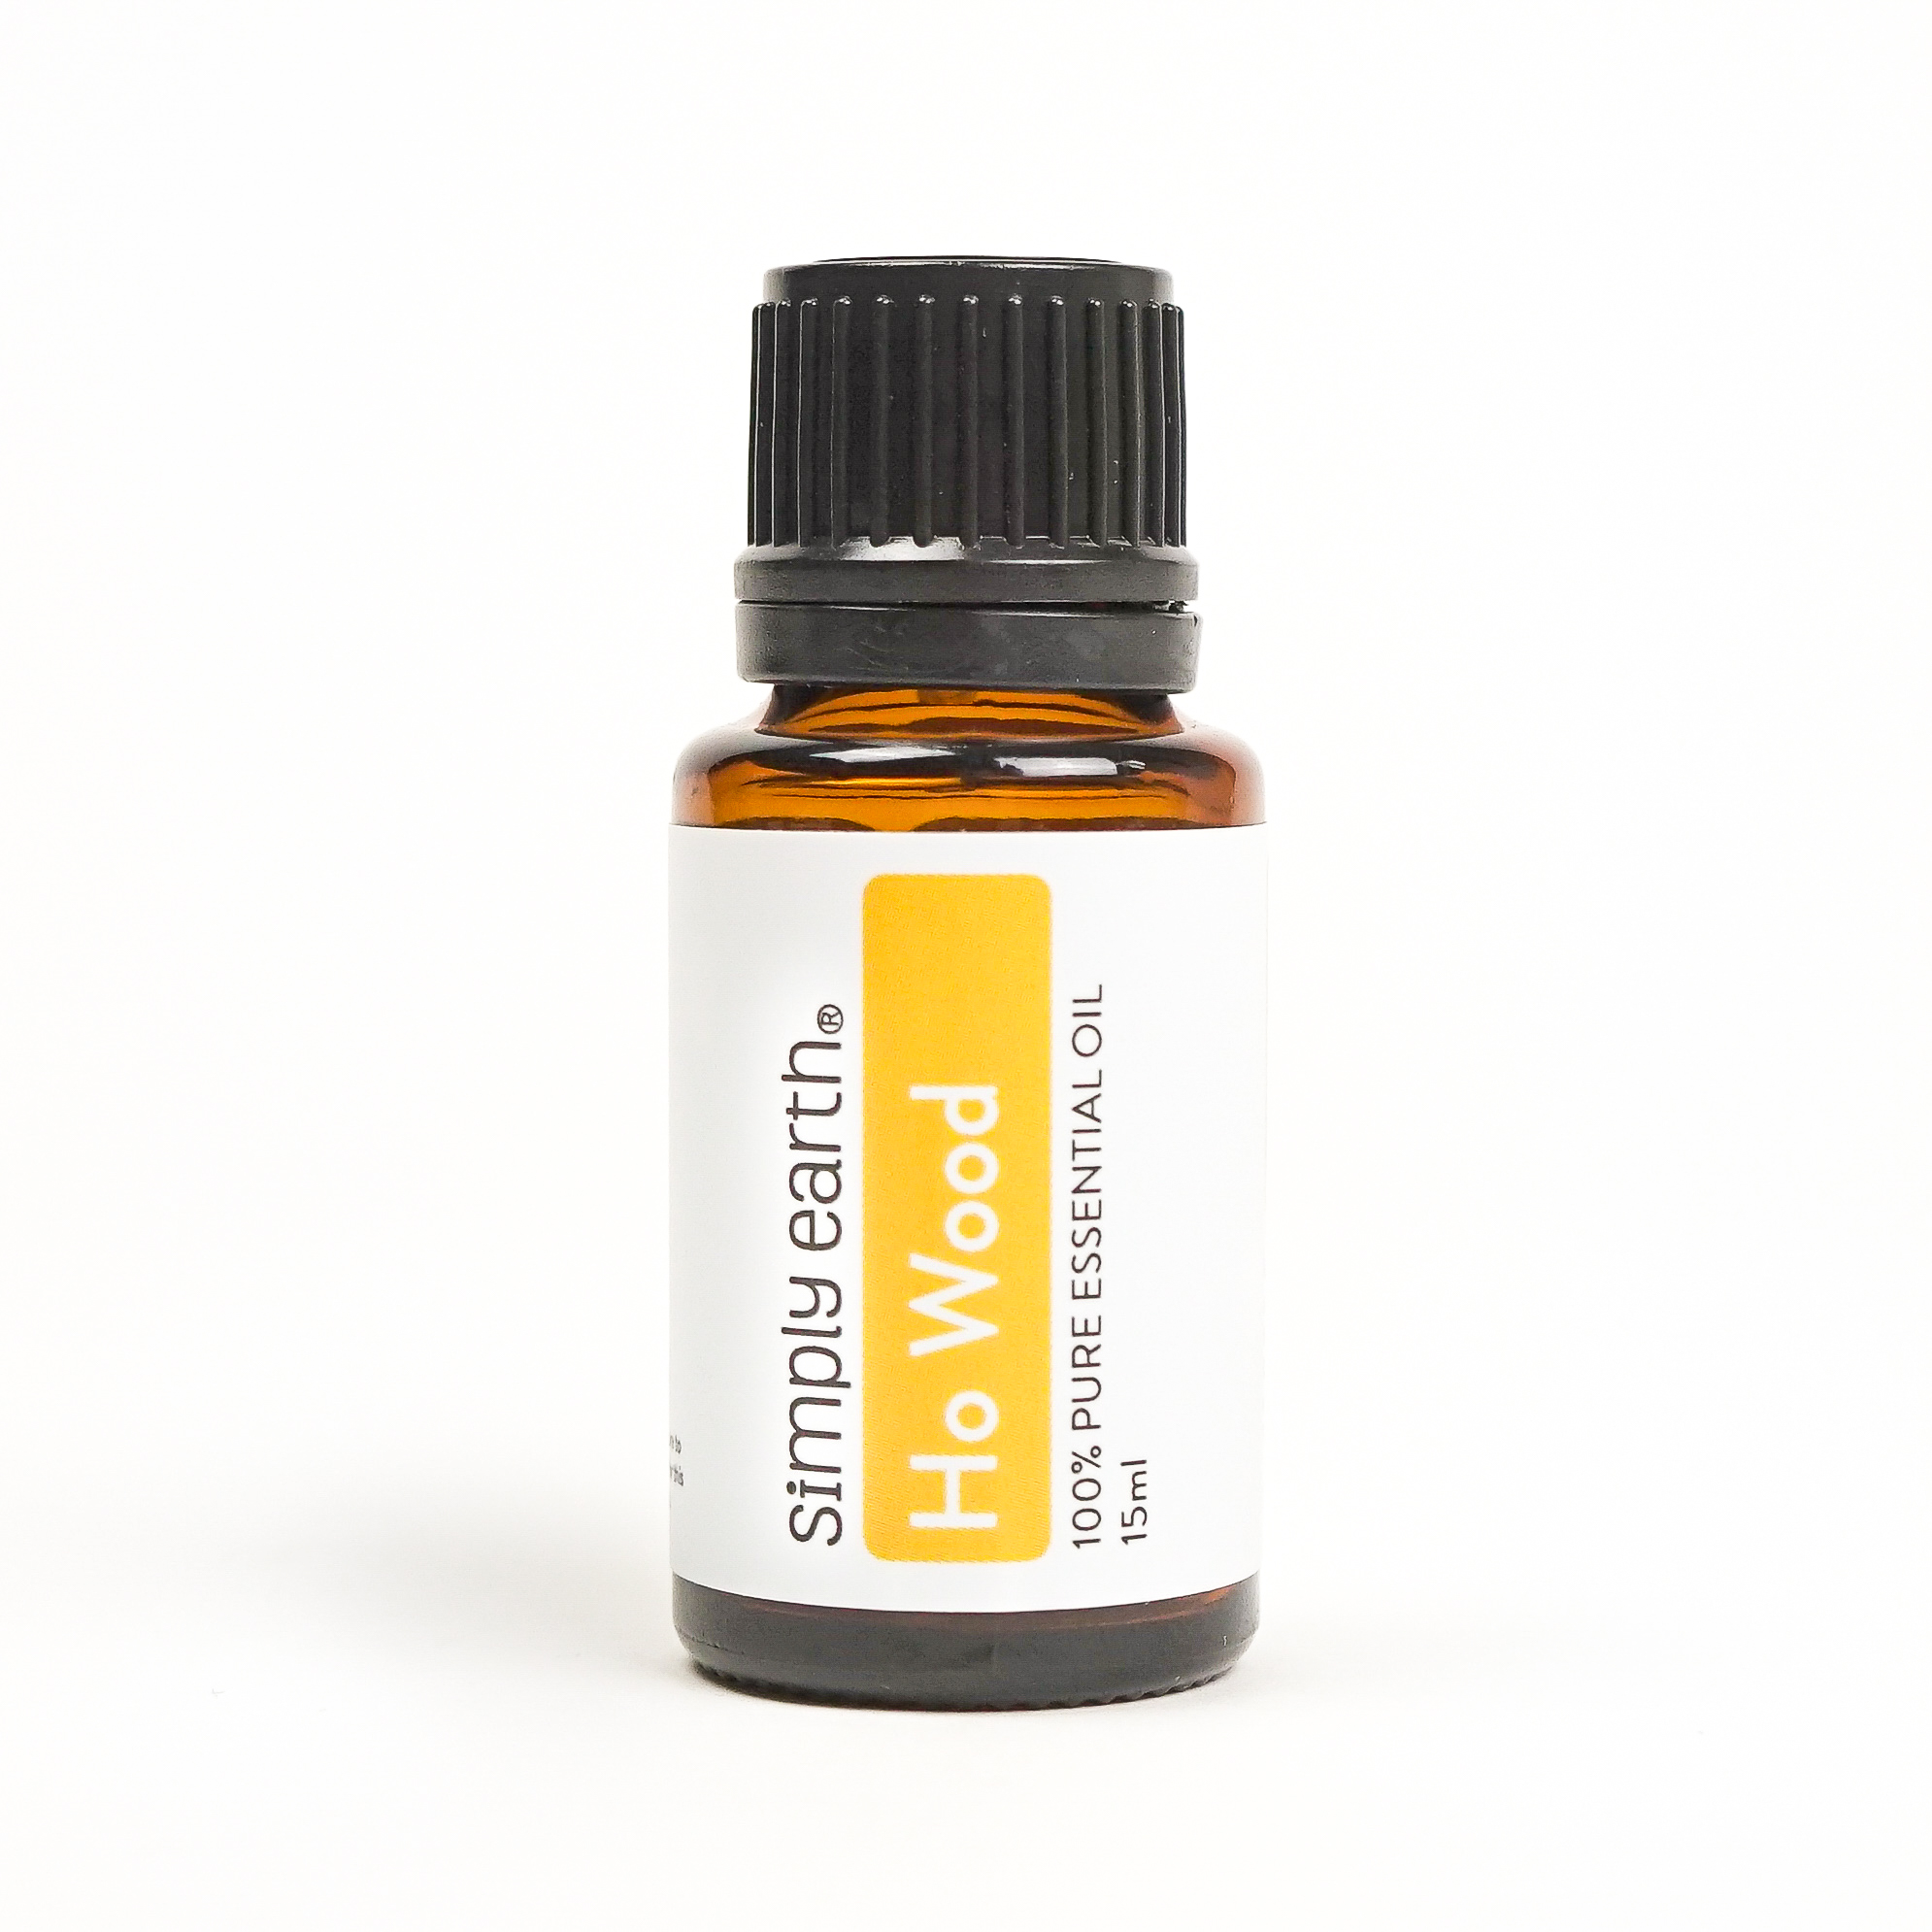 Ho Wood Essential Oil Size: 15ml